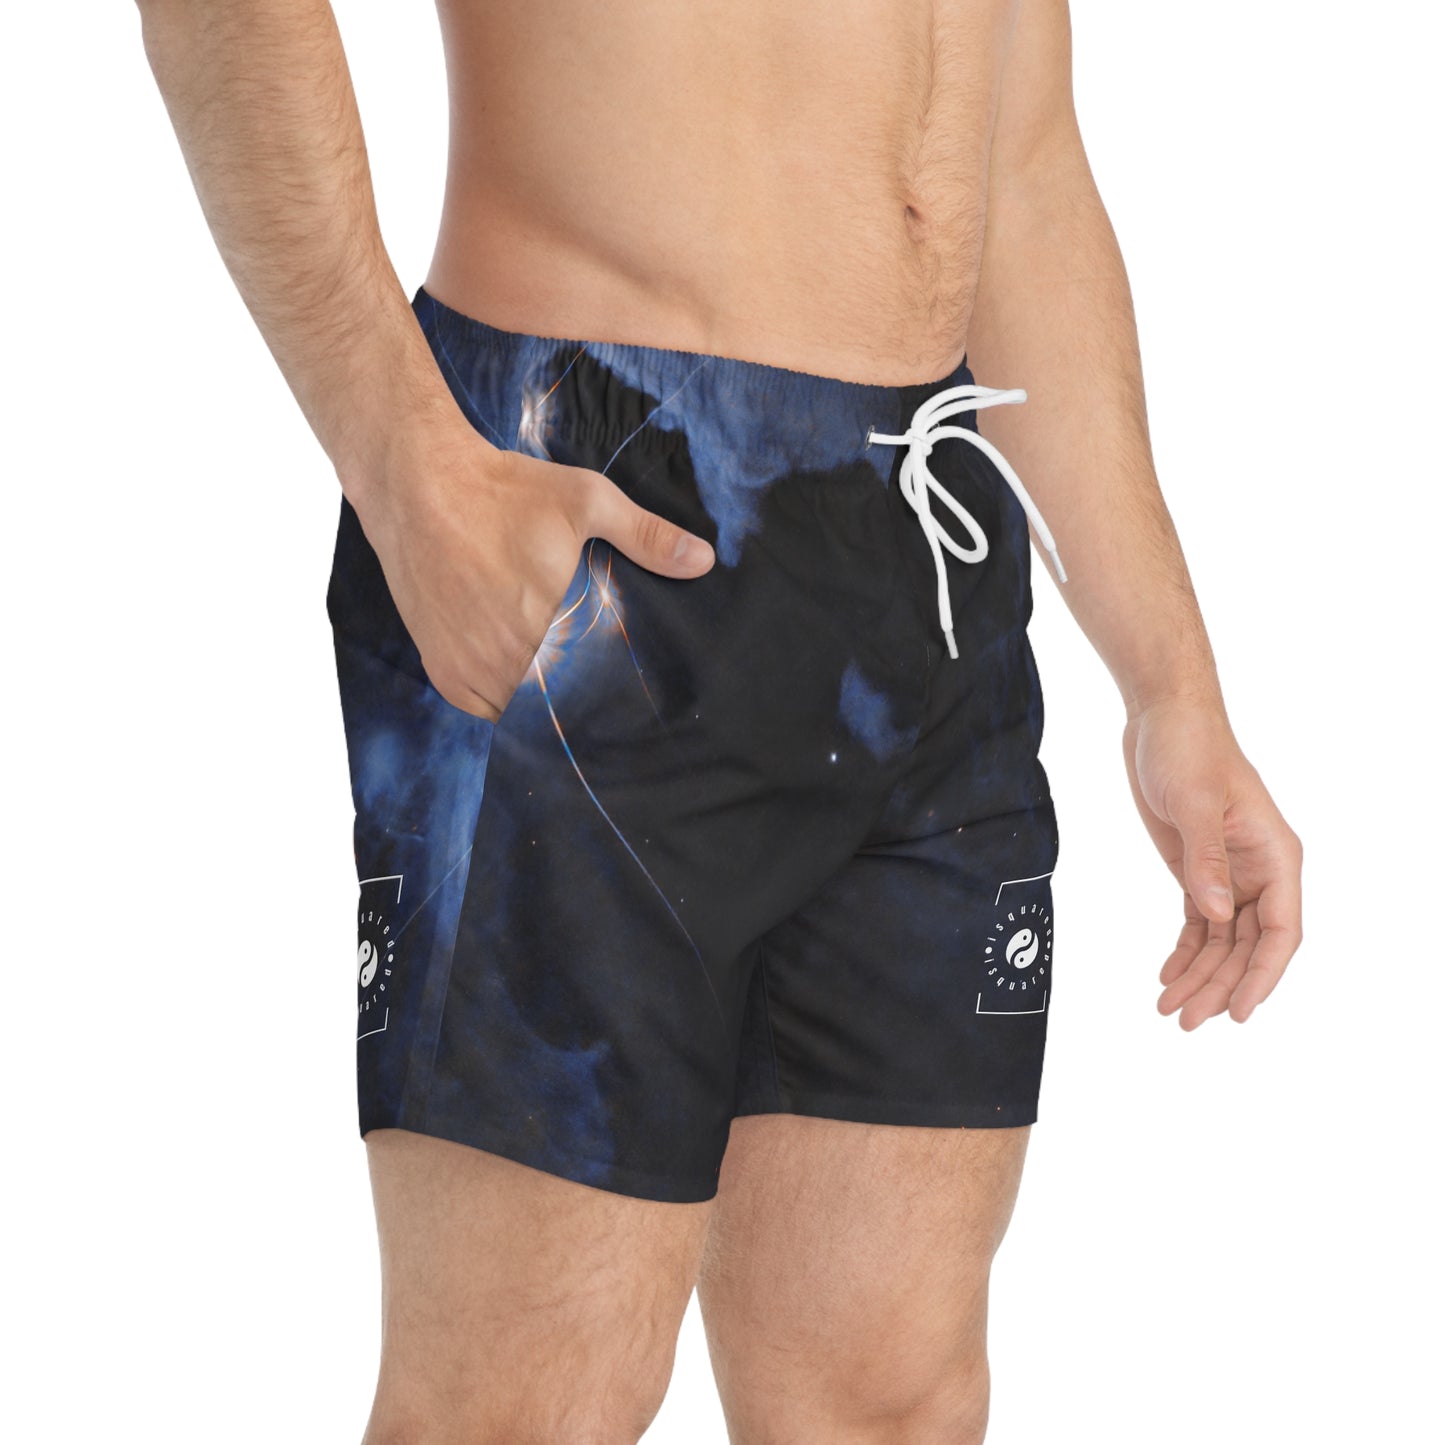 HP Tau, HP Tau G2, and G3 3 star system captured by Hubble - Swim Trunks for Men